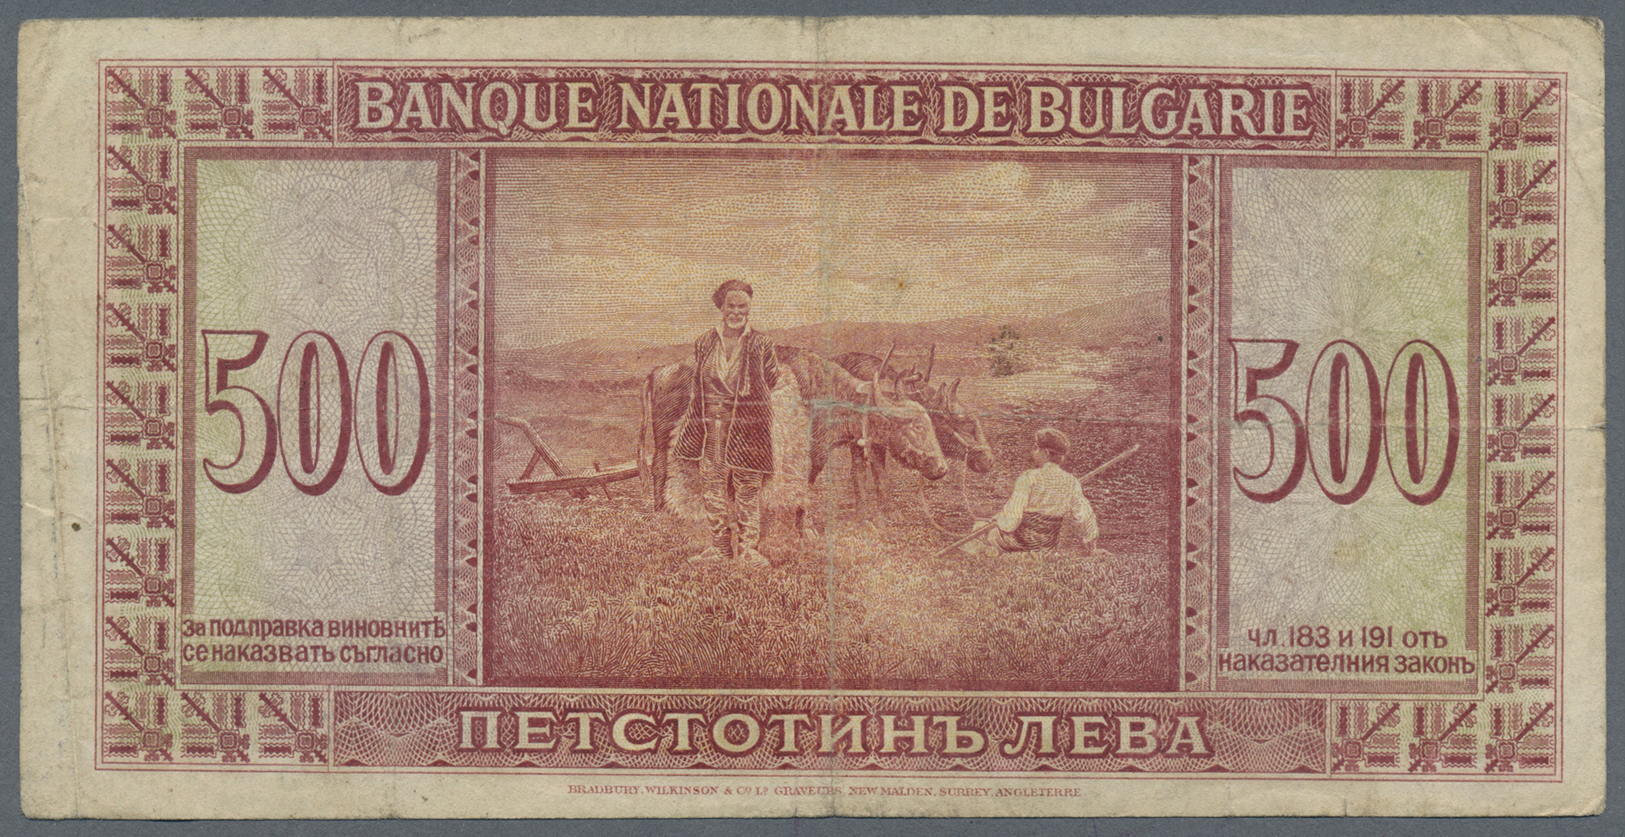 00396 Bulgaria / Bulgarien: 500 Leva 1925 P. 47, One Of The Key Notes Of This Series In Used Condition With Folds And Li - Bulgaria